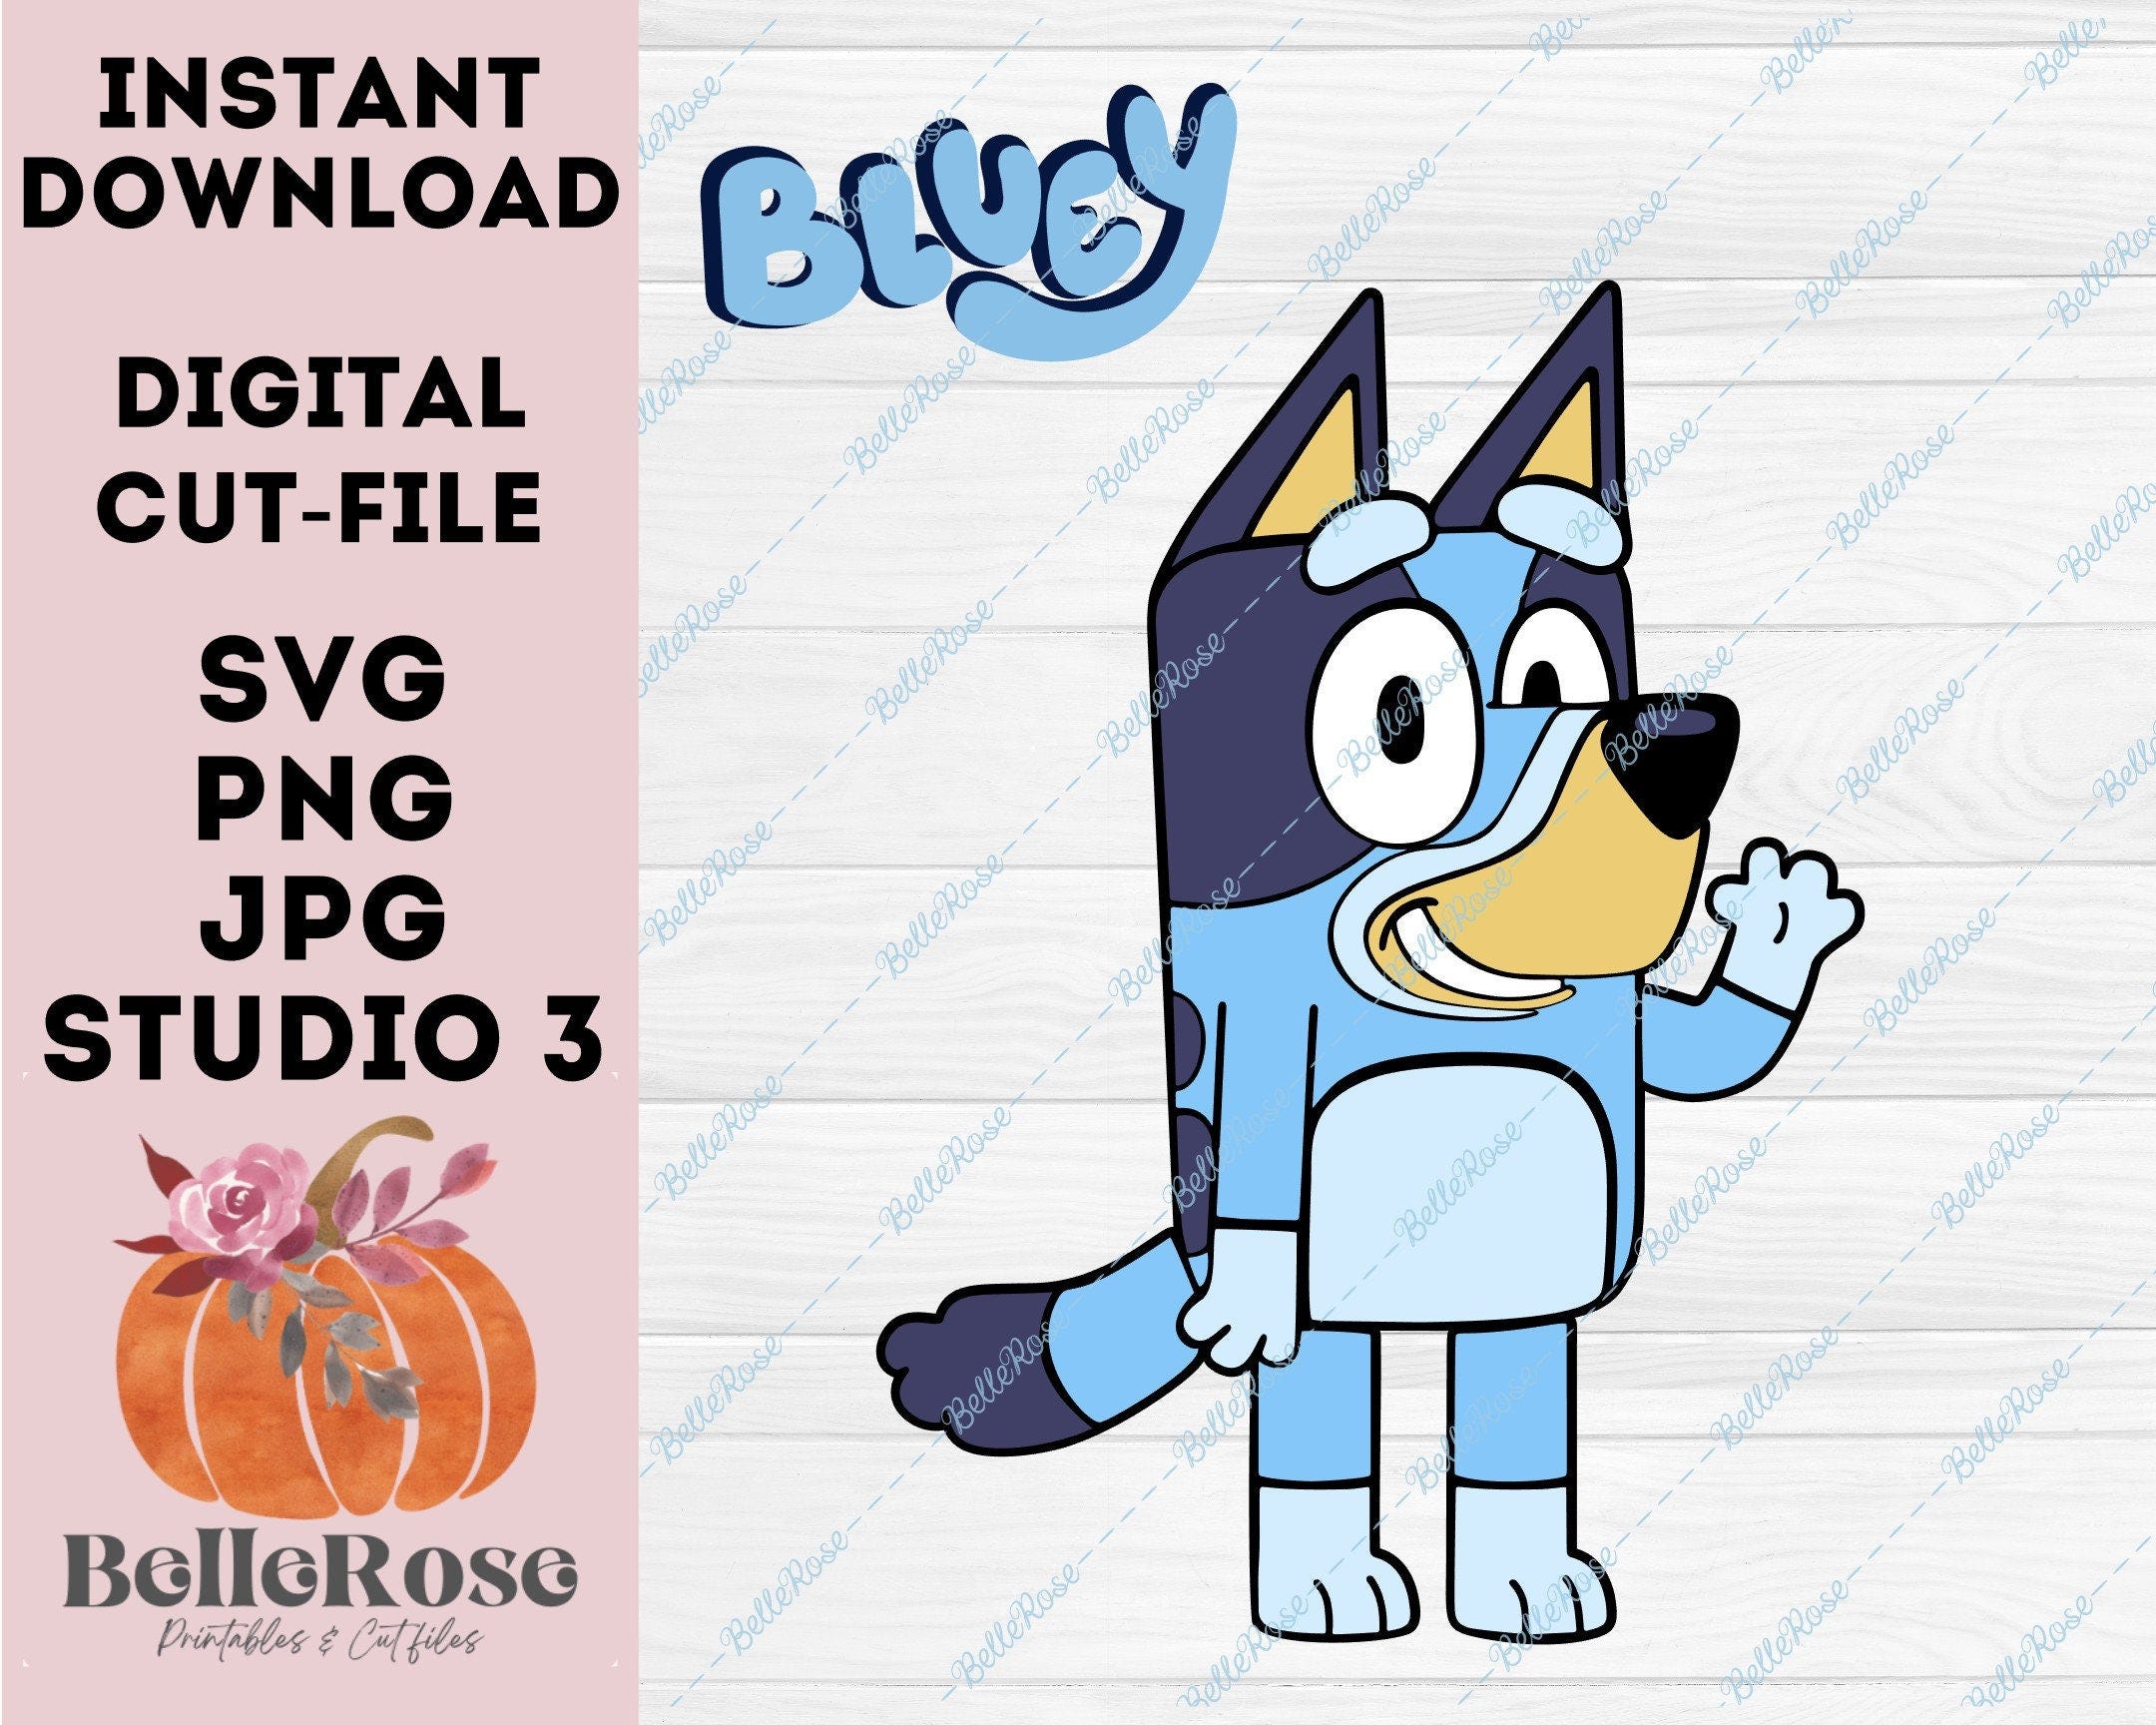 Blue dog cartoon inspired SVG Digital Download Cut file Cricut Silhouette Cameo Png Jpg Studio 3 Layered by color - Instant Download